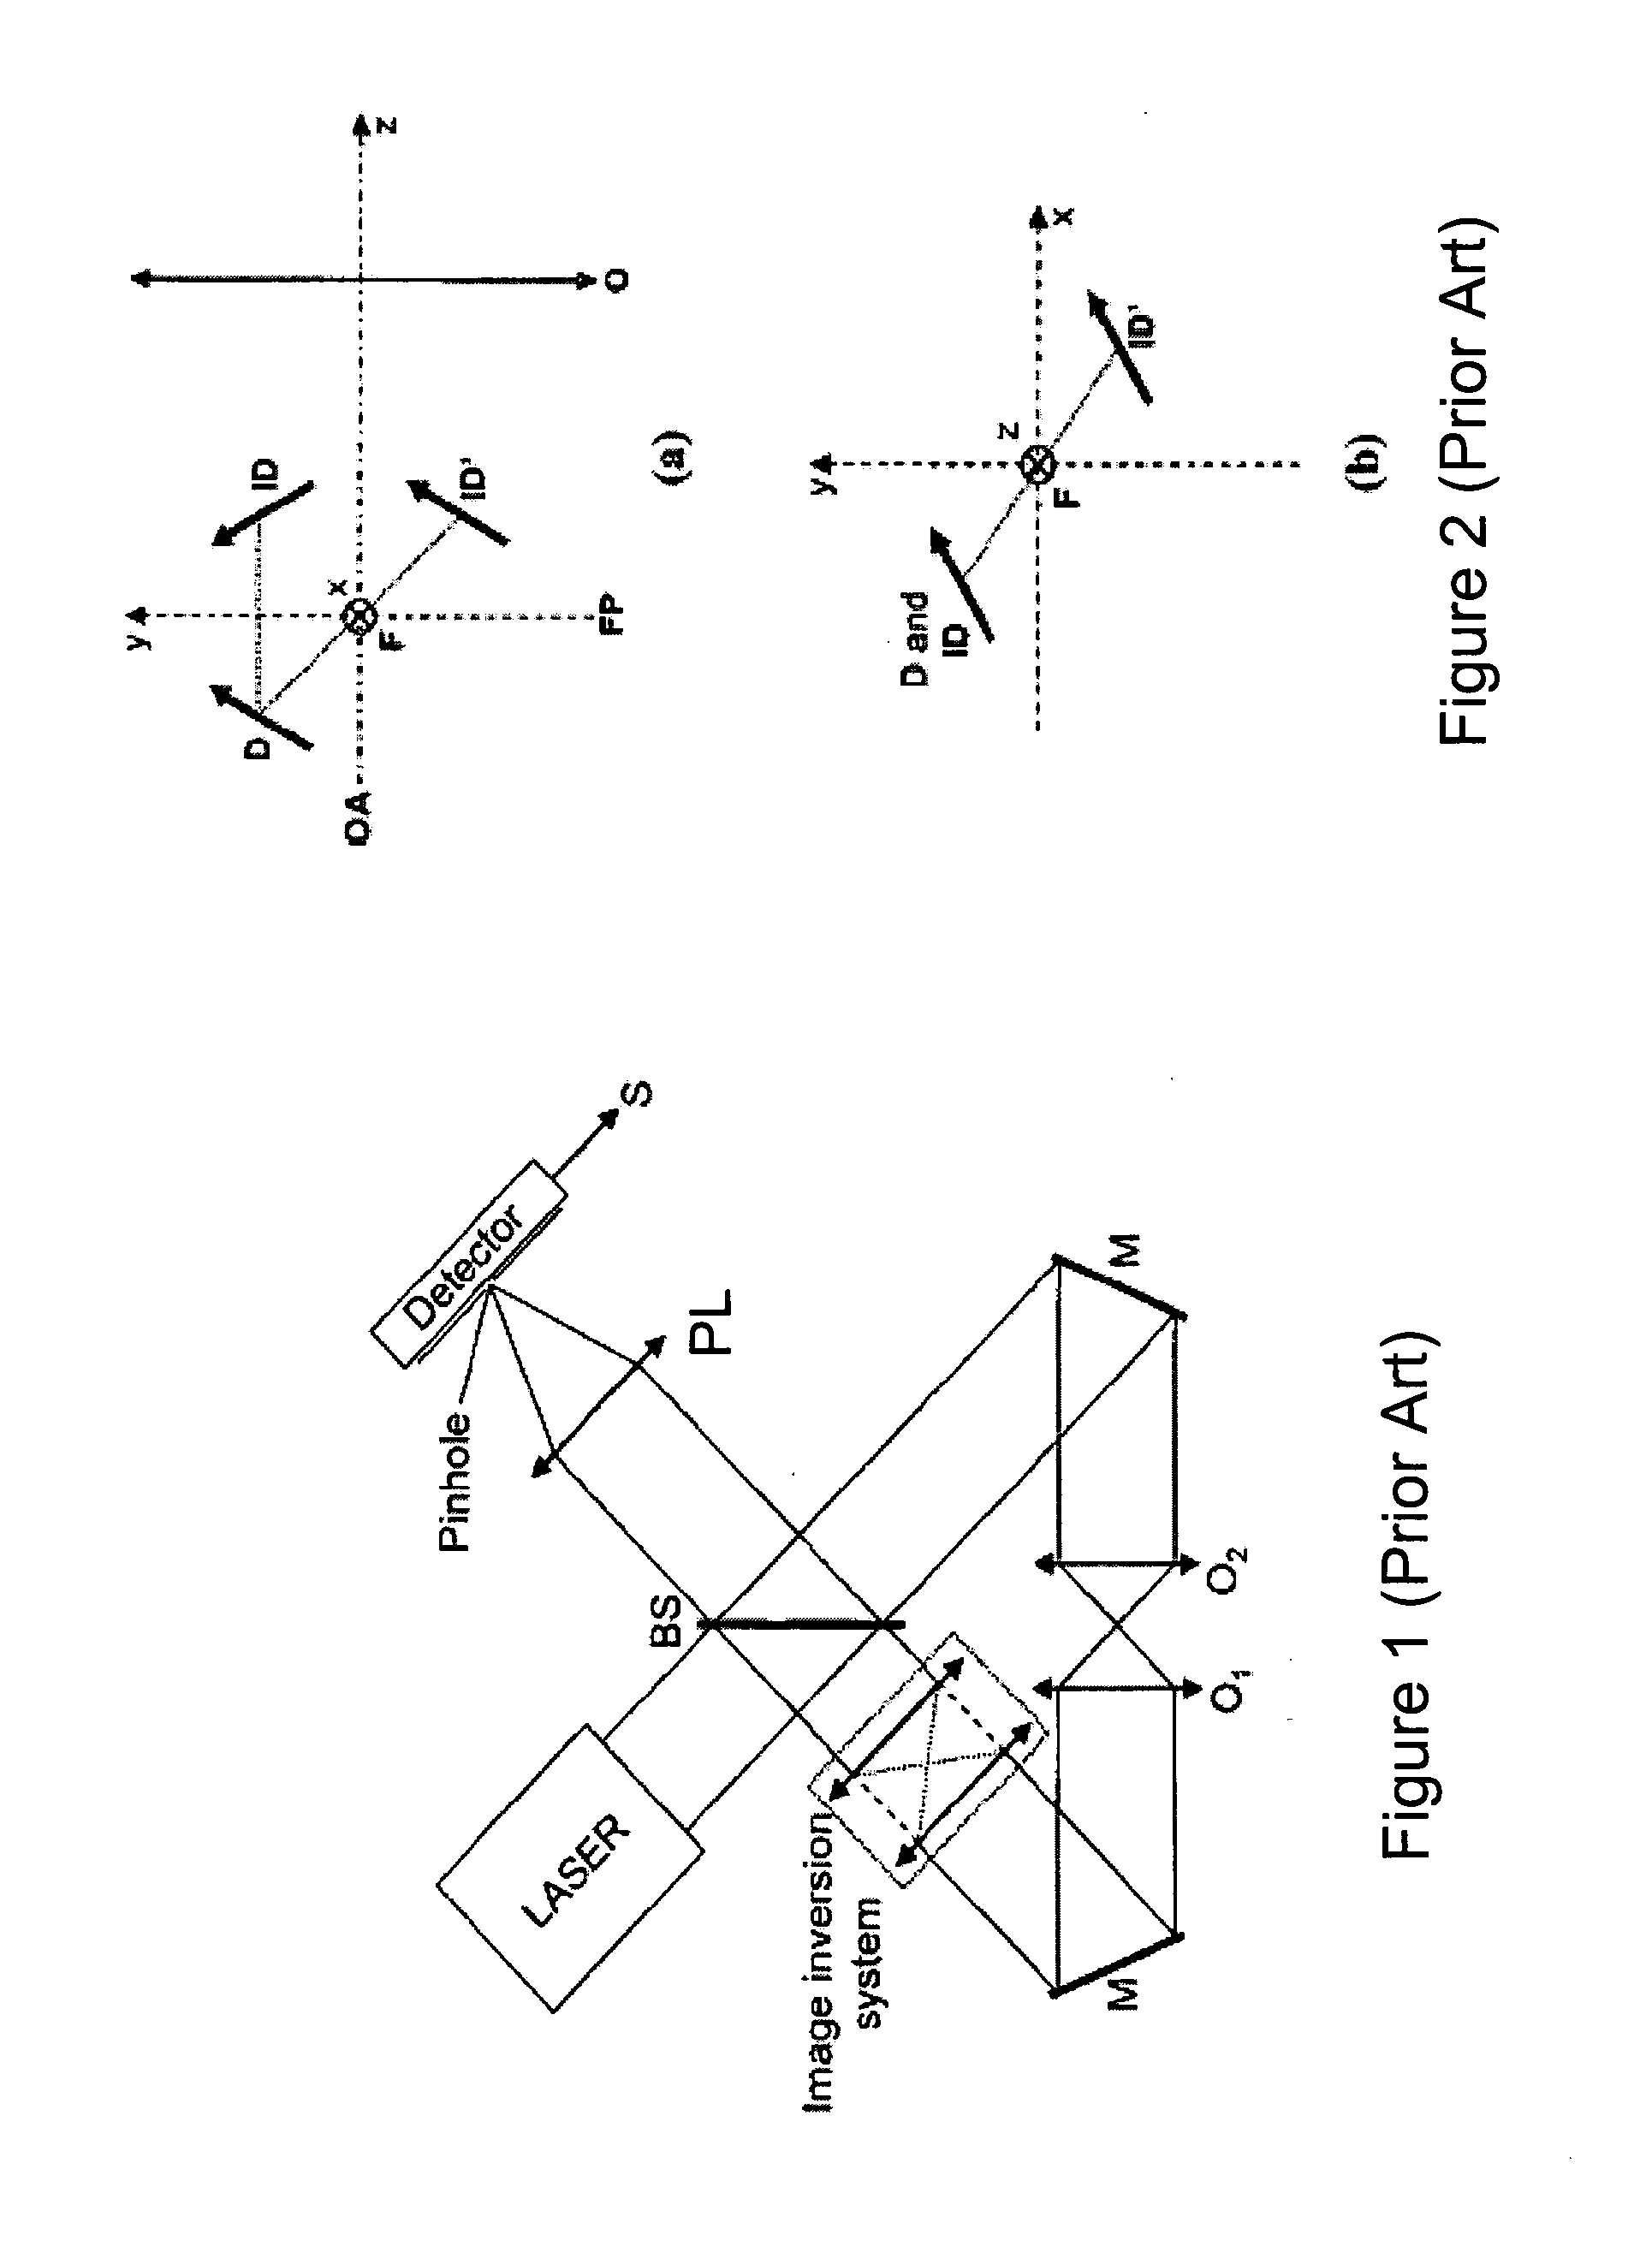 Method and Apparatus for Improving Image Resolution